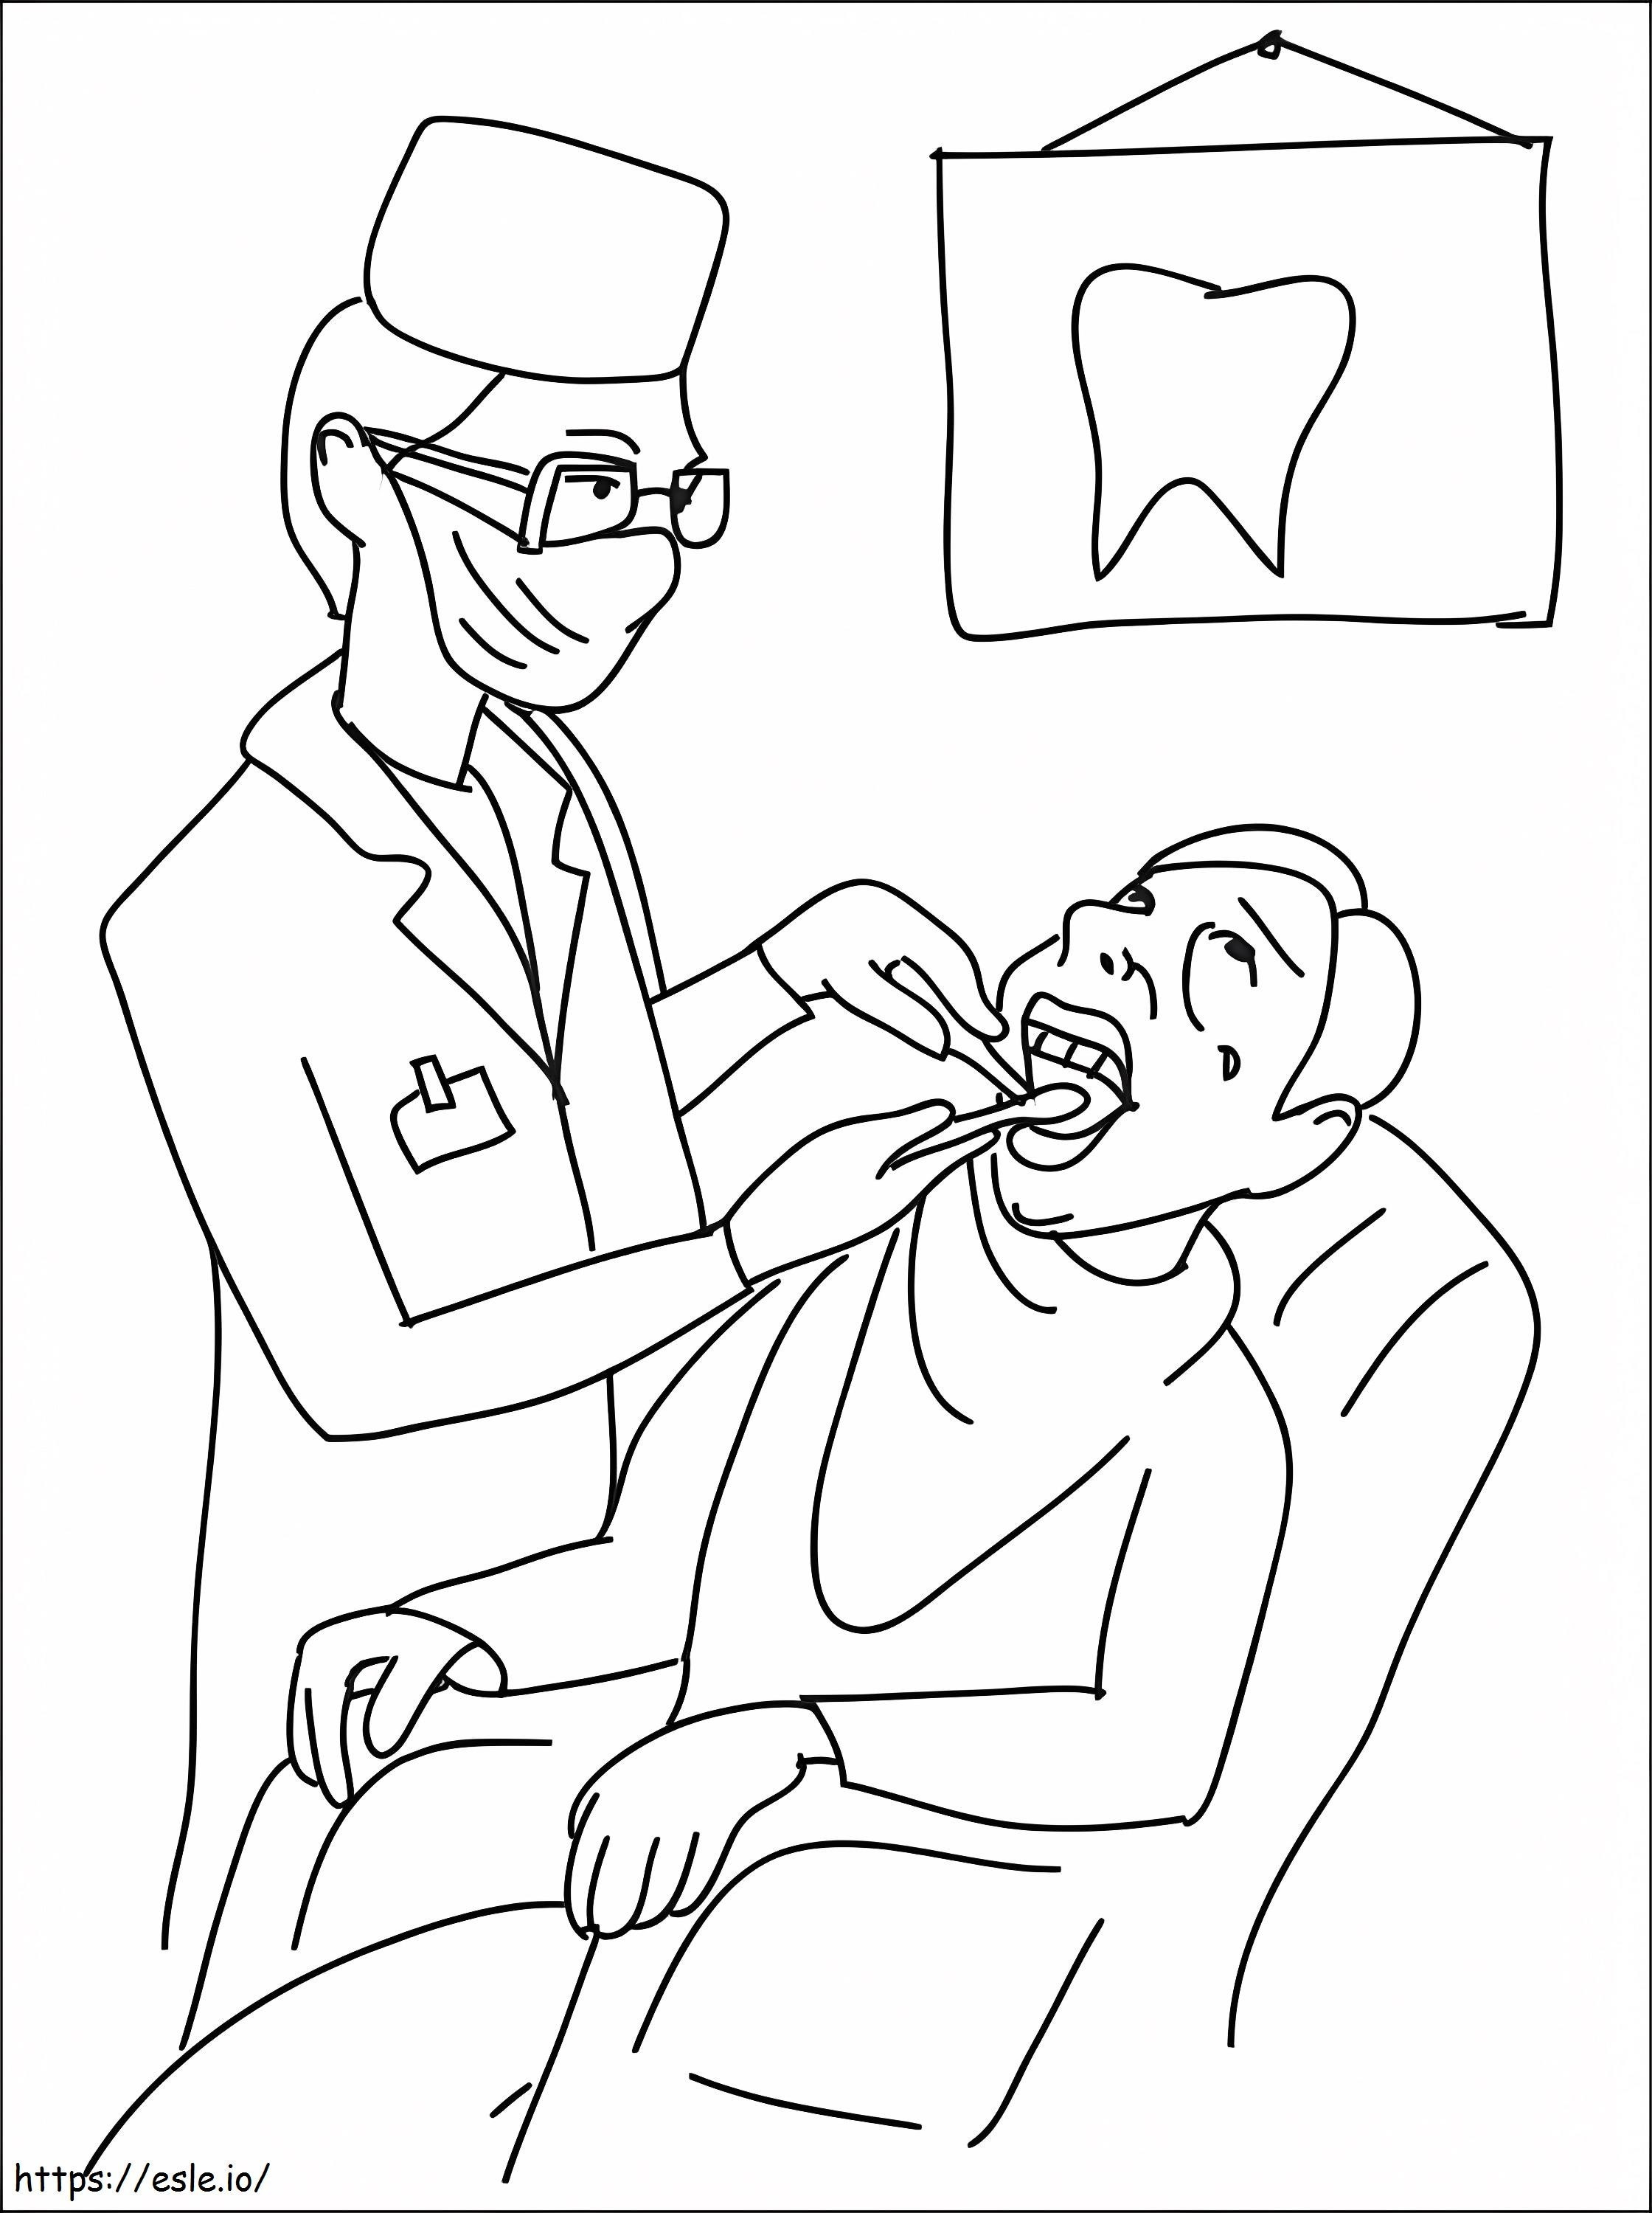 Dentist Working coloring page